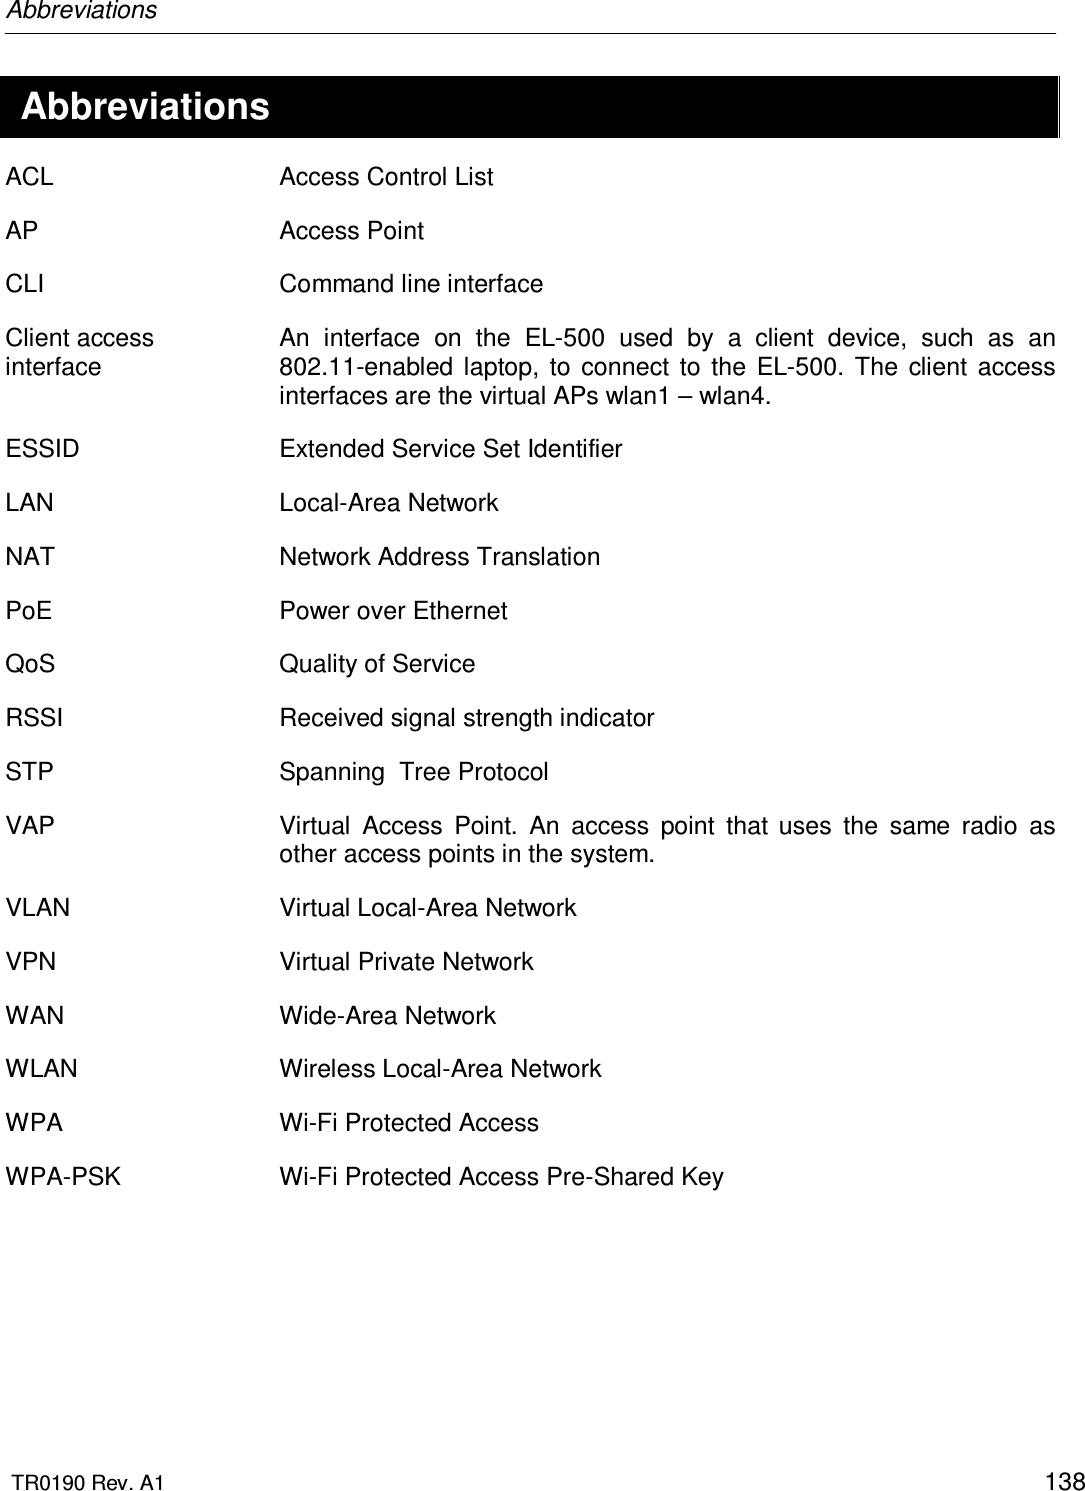 Abbreviations  TR0190 Rev. A1    138  Abbreviations ACL  Access Control List AP  Access Point CLI  Command line interface Client access interface An  interface  on  the  EL-500  used  by  a  client  device,  such  as  an 802.11-enabled  laptop,  to  connect  to  the  EL-500.  The  client  access interfaces are the virtual APs wlan1 – wlan4. ESSID  Extended Service Set Identifier LAN  Local-Area Network NAT  Network Address Translation PoE  Power over Ethernet QoS  Quality of Service RSSI  Received signal strength indicator STP  Spanning  Tree Protocol VAP  Virtual  Access  Point.  An  access  point  that  uses  the  same  radio  as other access points in the system. VLAN  Virtual Local-Area Network VPN  Virtual Private Network WAN  Wide-Area Network WLAN  Wireless Local-Area Network WPA  Wi-Fi Protected Access WPA-PSK  Wi-Fi Protected Access Pre-Shared Key   